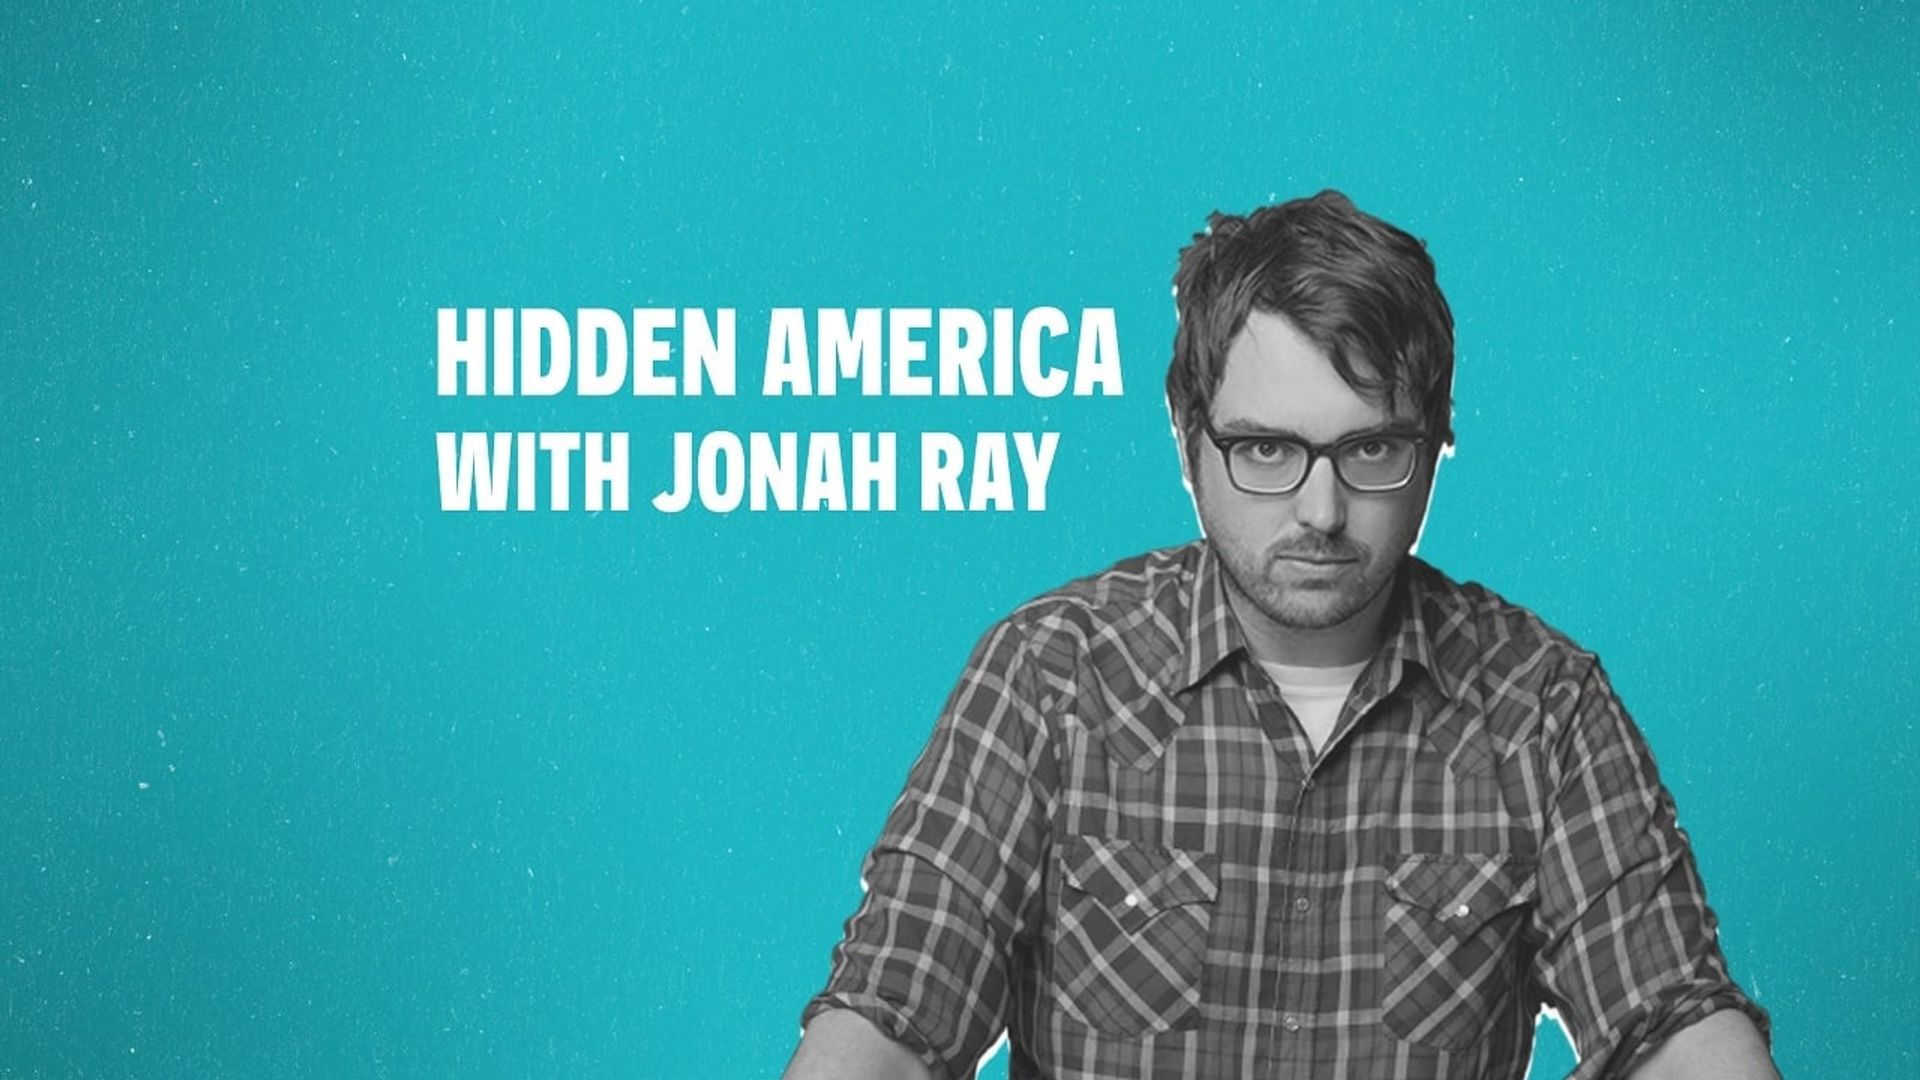 Hidden America with Jonah Ray background